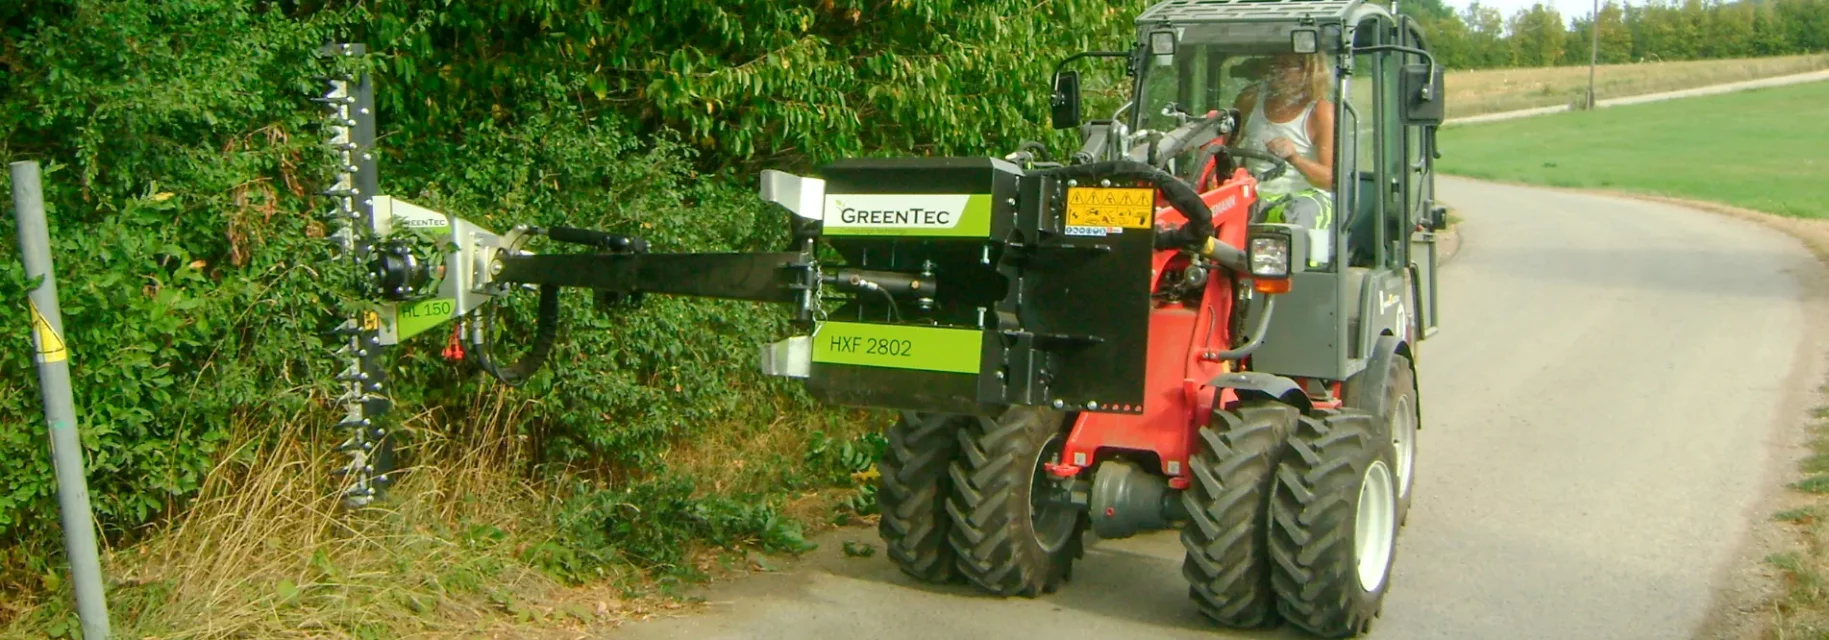 Hydraulic hedge cutter attachment for skid steer loader